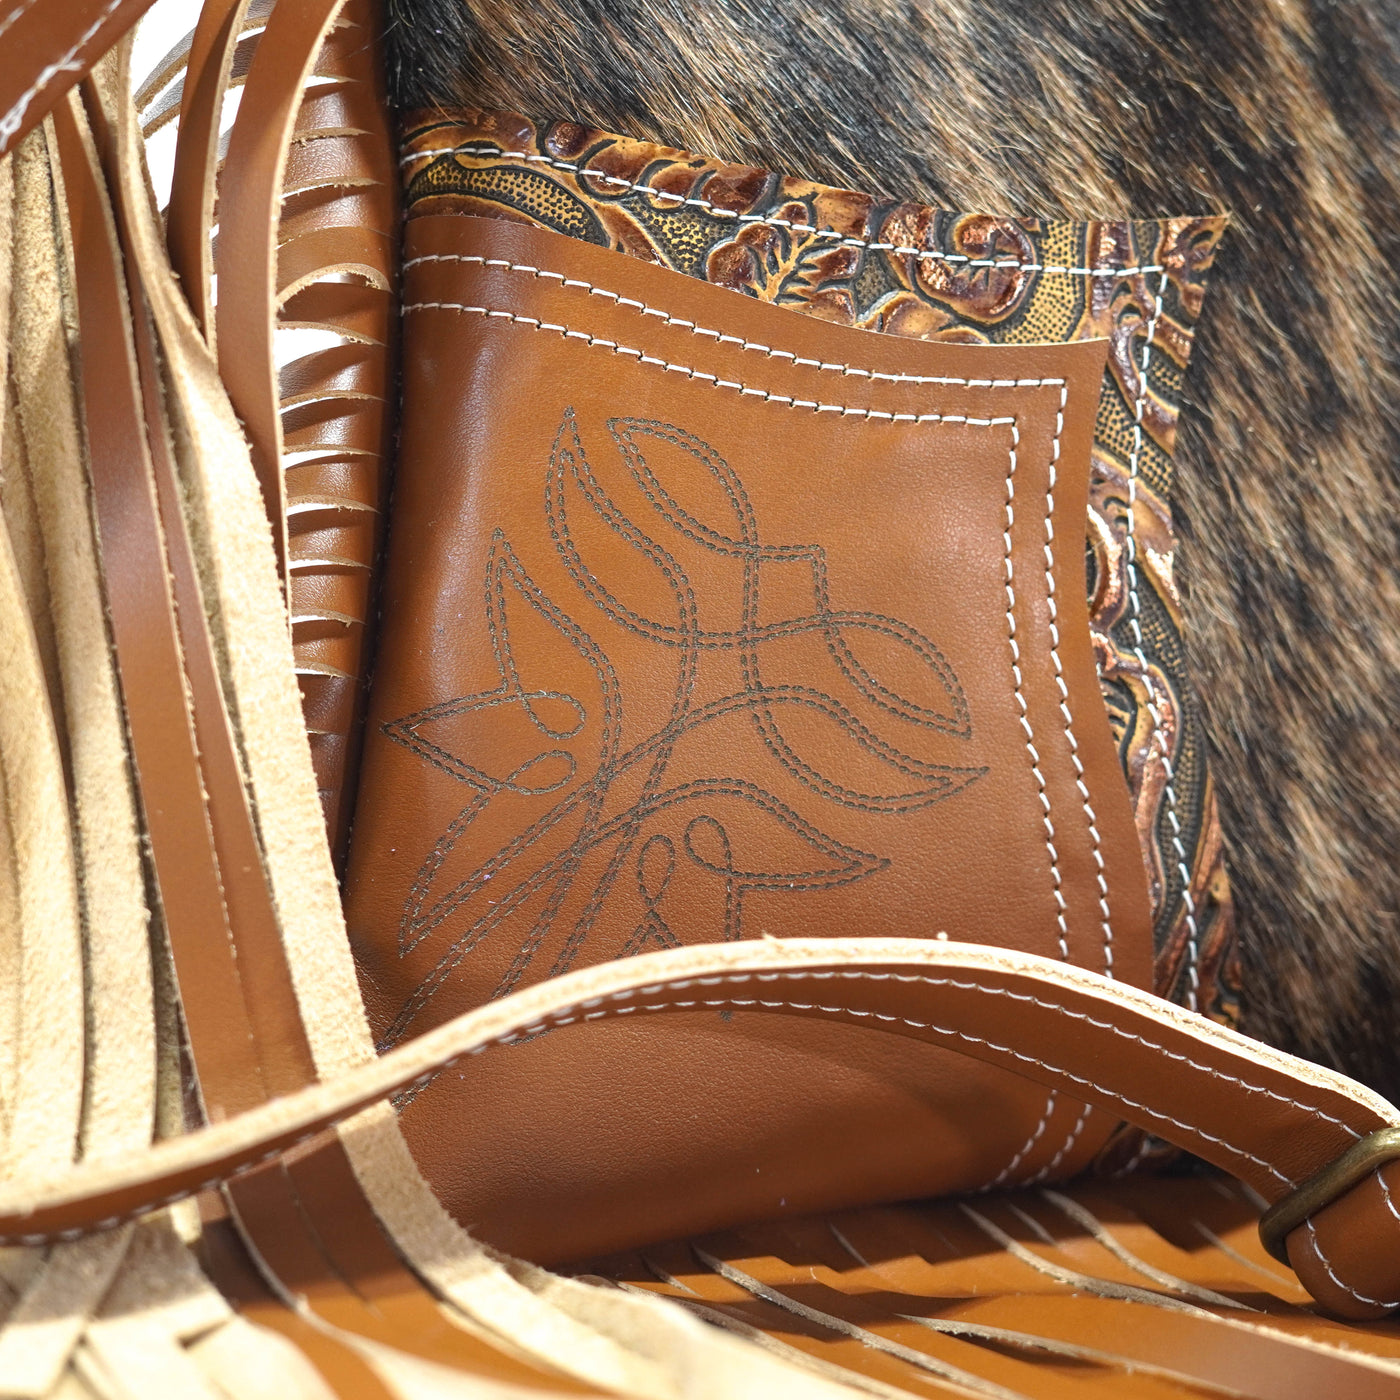 Shania - Two-Tone Brindle w/ Wyoming Tool-Shania-Western-Cowhide-Bags-Handmade-Products-Gifts-Dancing Cactus Designs